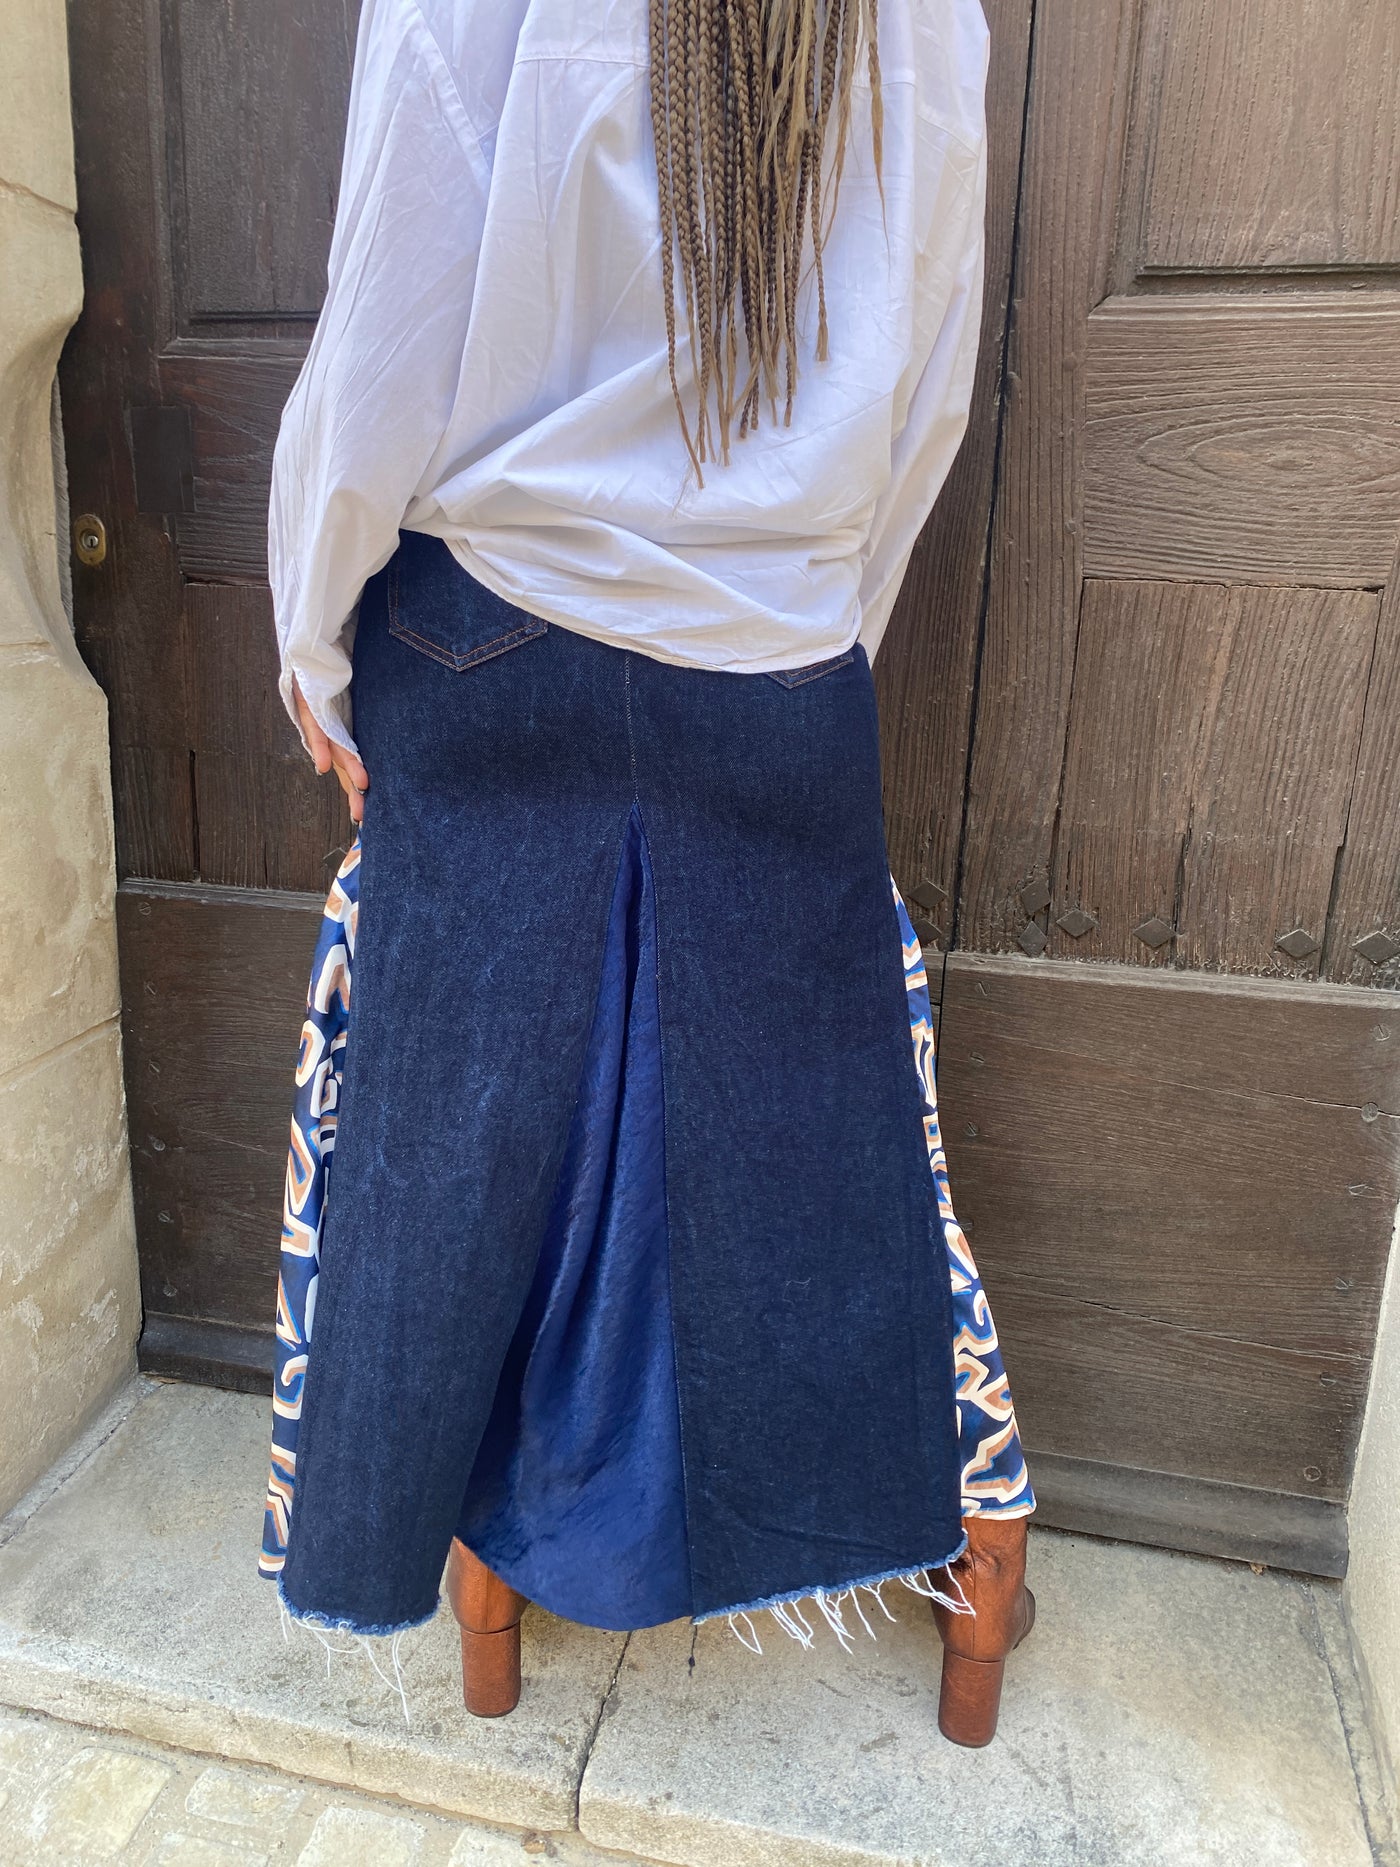 ADELINE - JUPE LONGUE JEANS UPCYCLéE 2 TISSUS